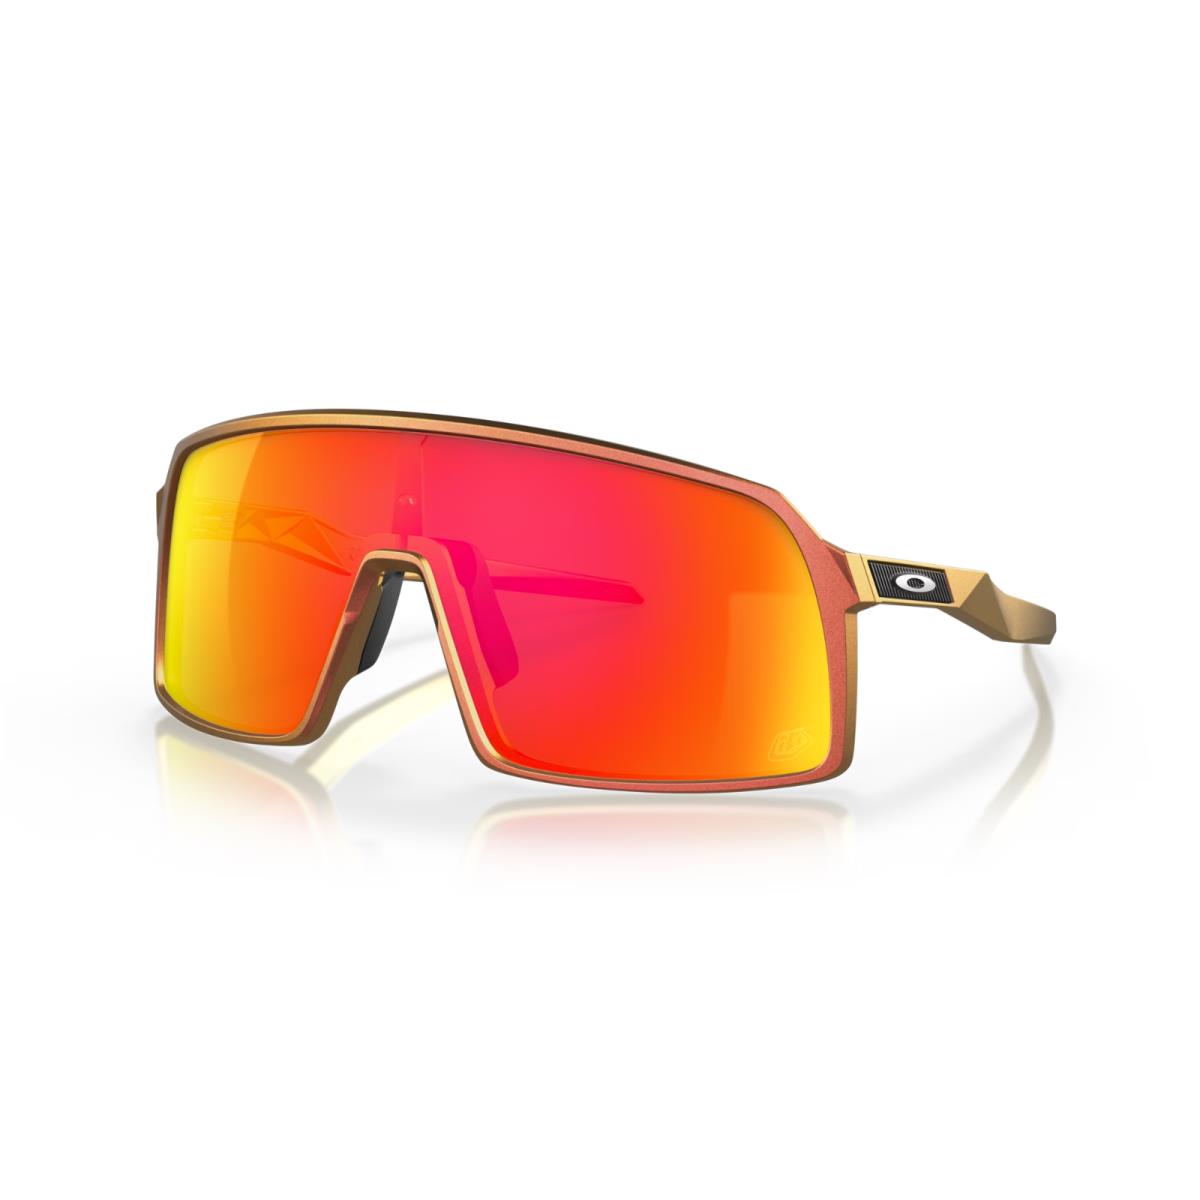 Oakley Tld Sutro Sunglasses OO9406-4837 Red Gold Shift Frame W/ Prizm Ruby Lens